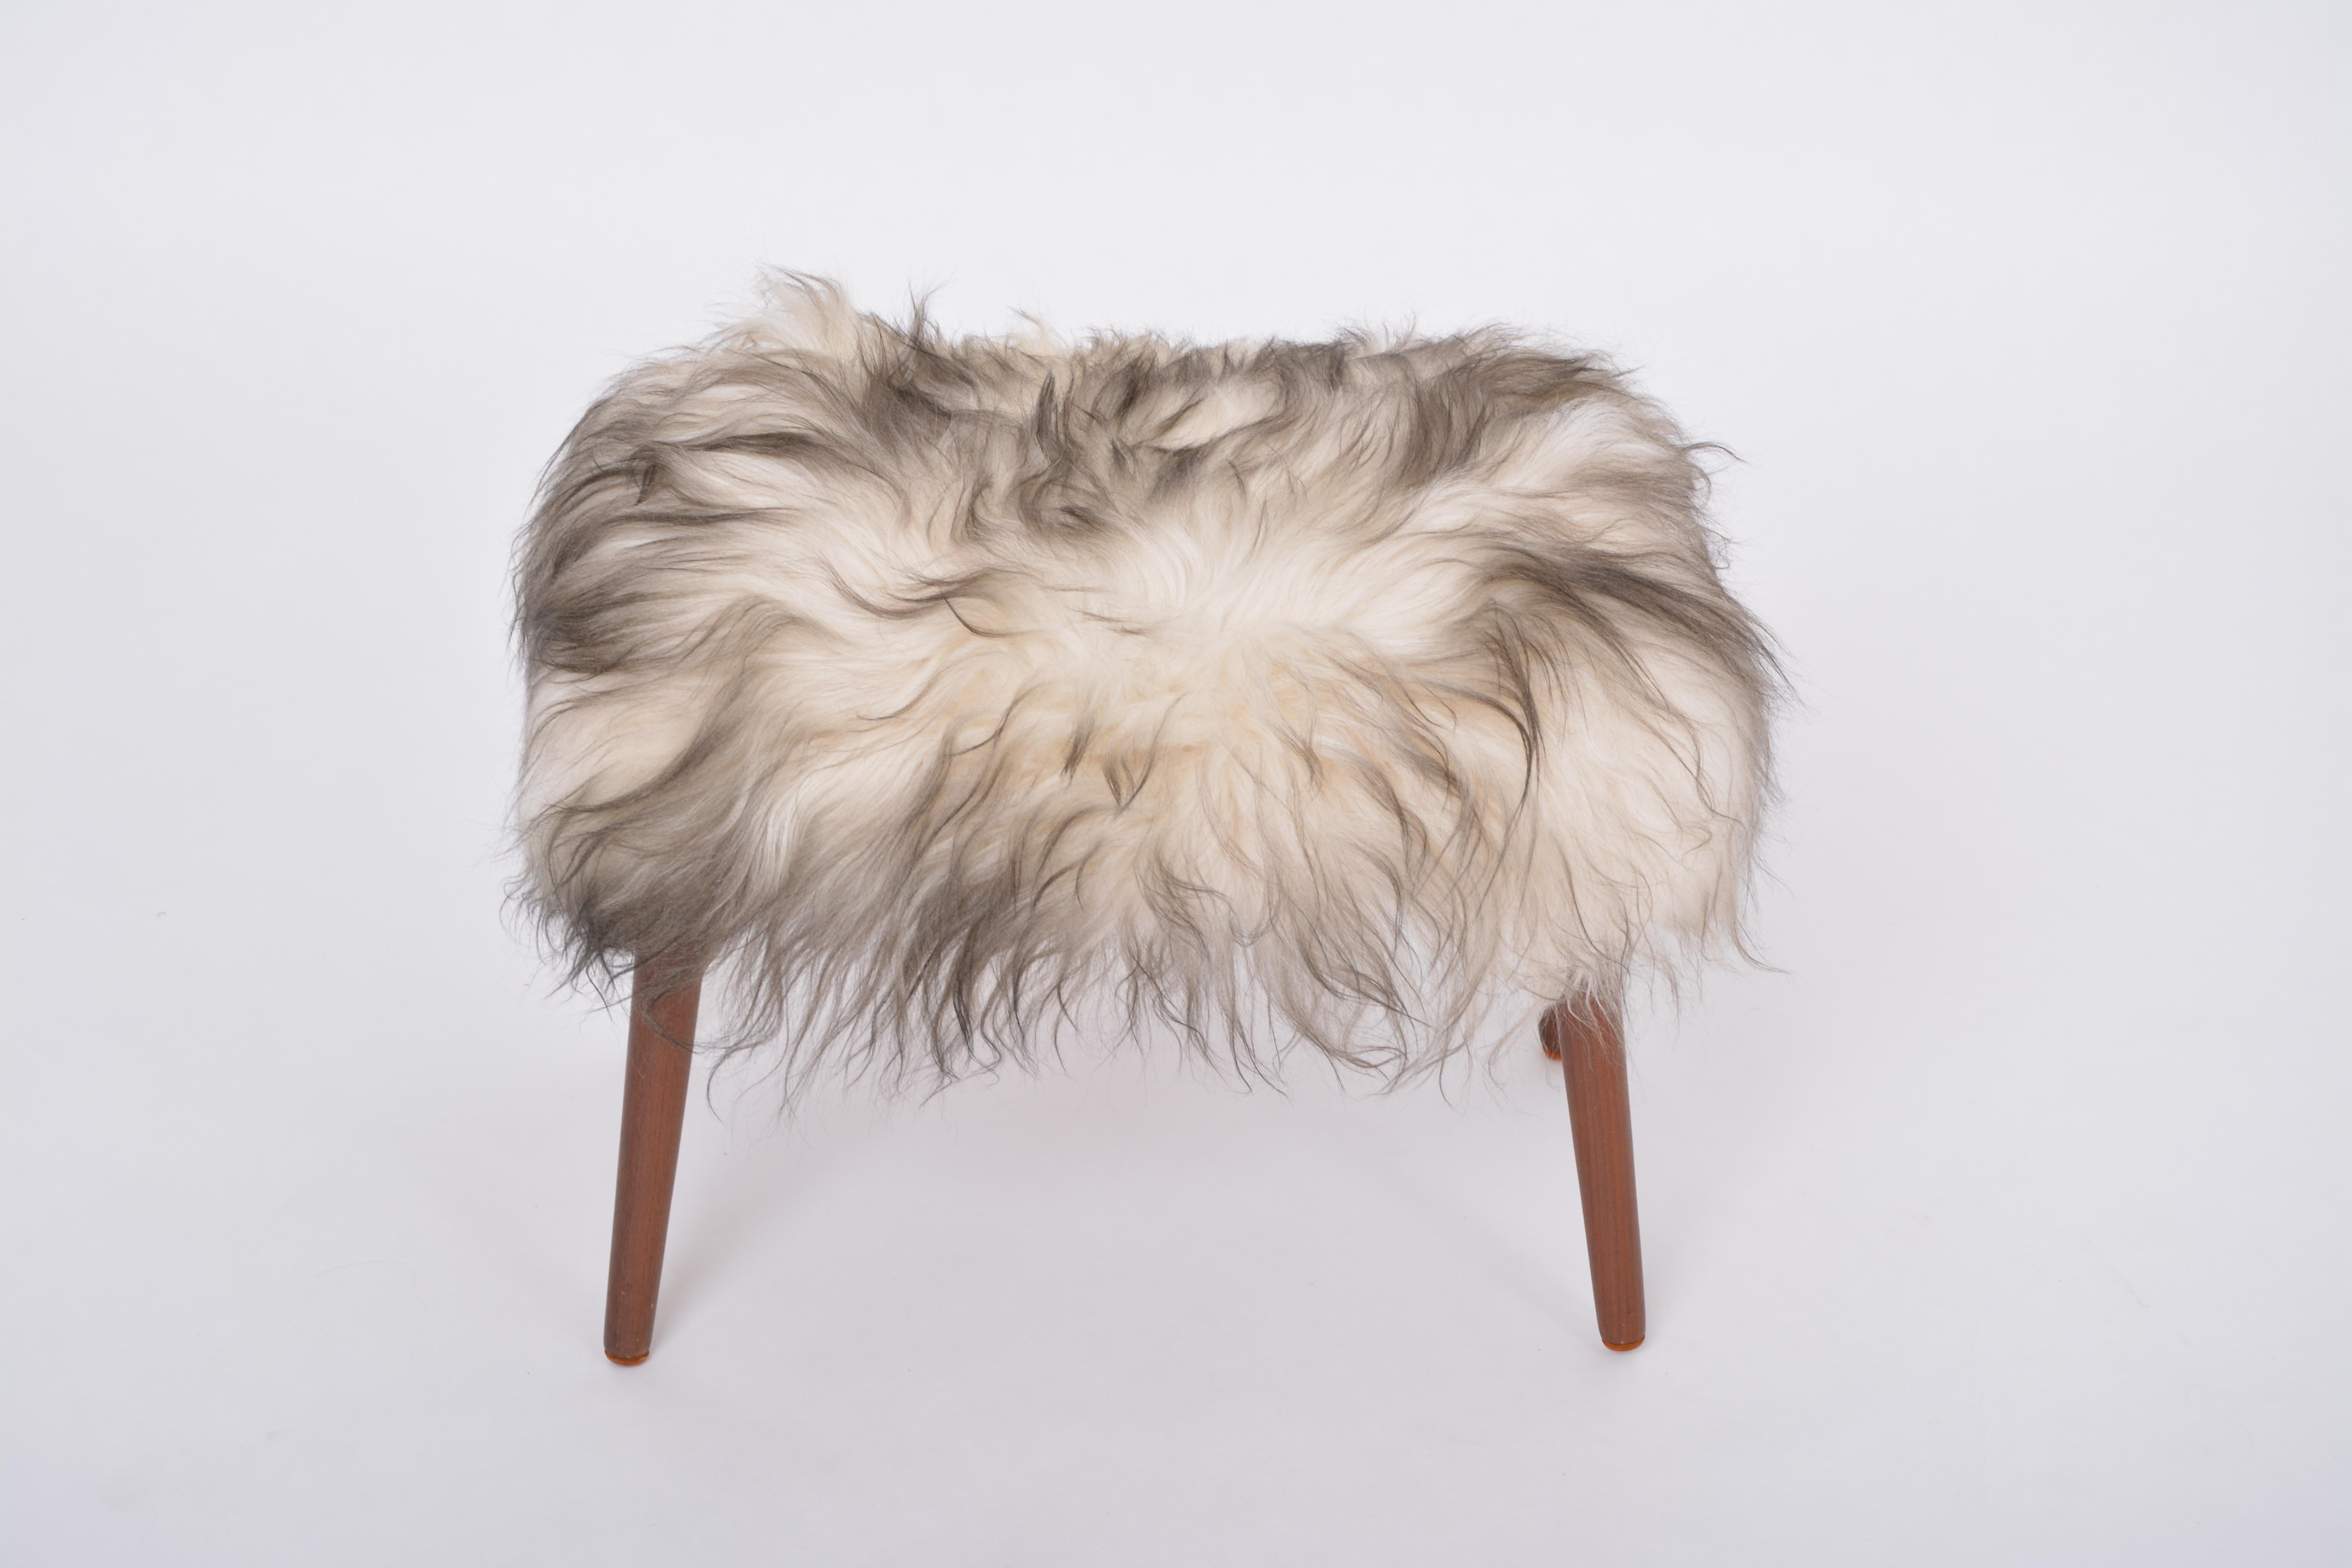 Danish Mid-century Modern stool reupholstered in white and black sheep skin For Sale 2